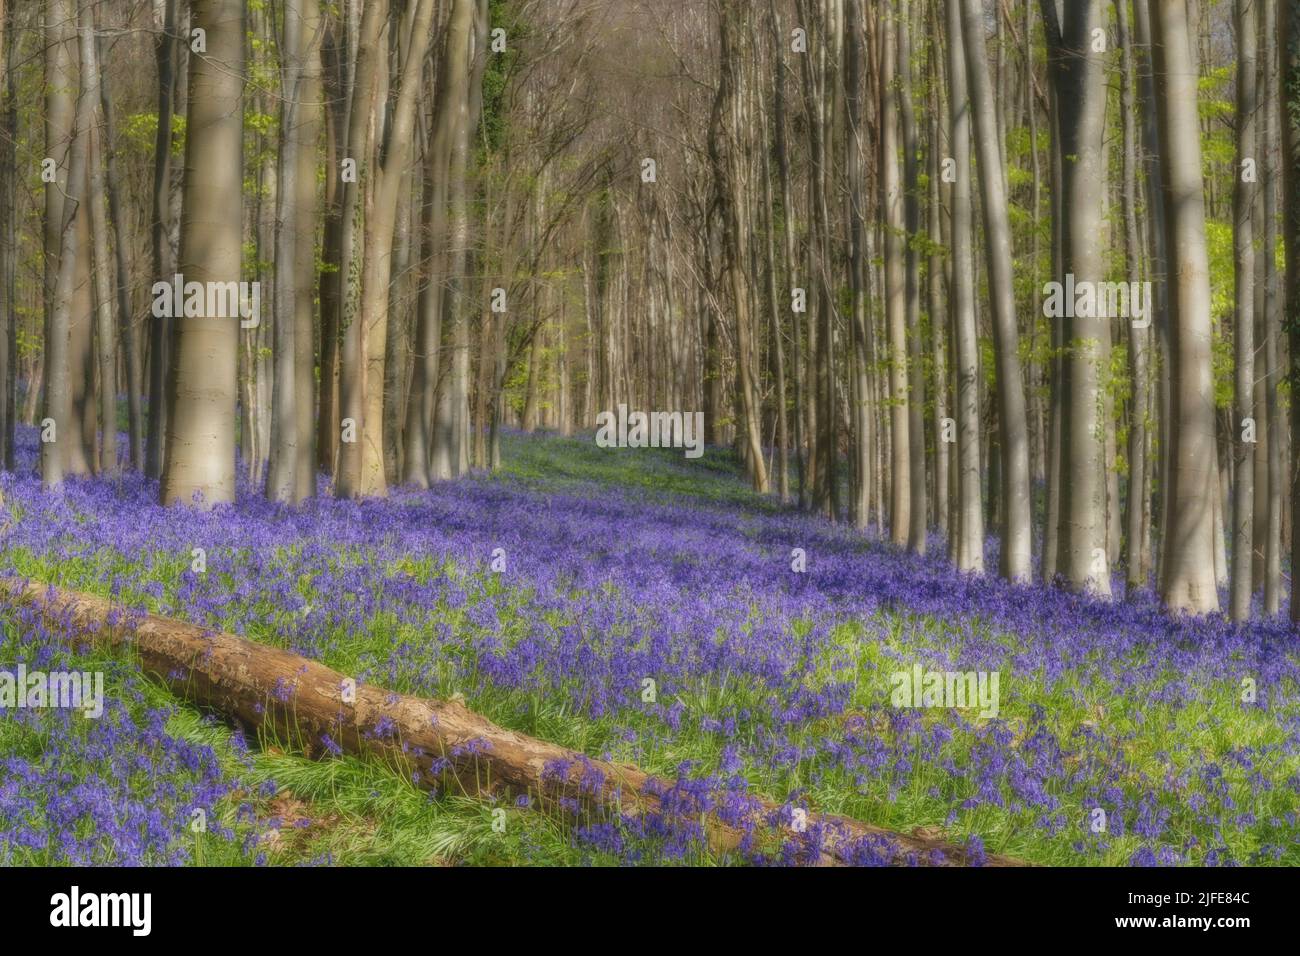 Springtime in the bluebell wood of Nore Wood, an ancient woodland on the Slindon Estate belonging to The National Trust Stock Photo